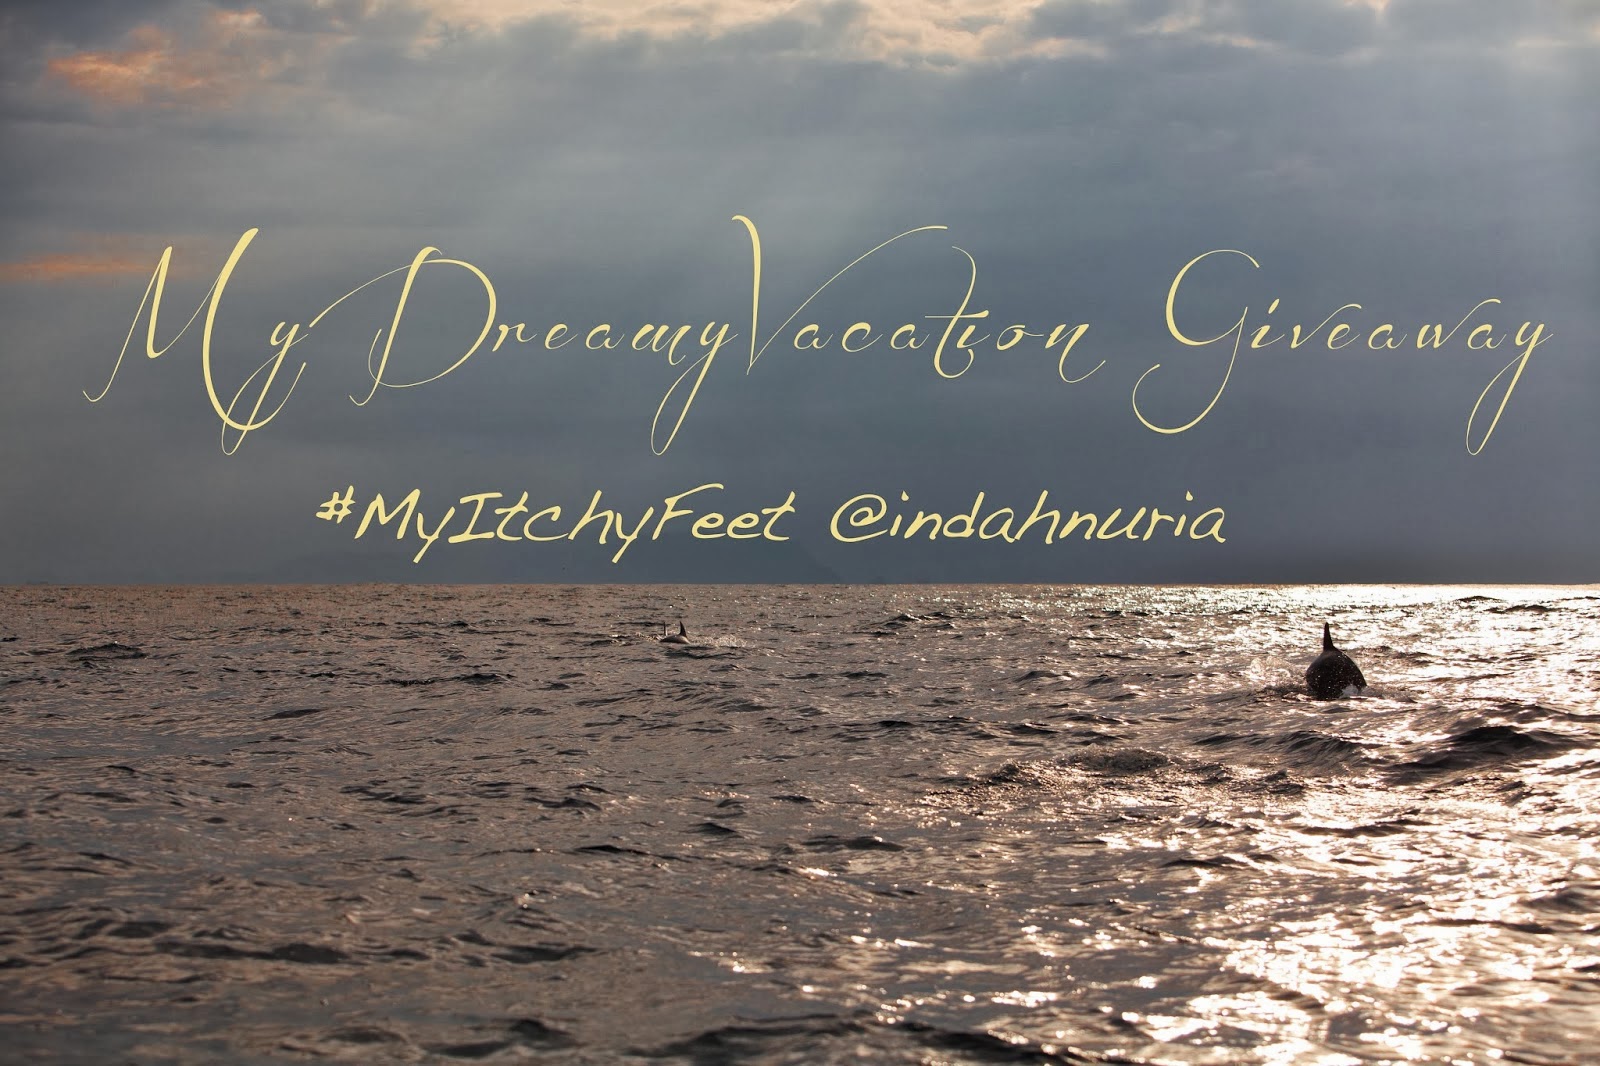 http://www.indahnuria.blogspot.com/2014/02/mydreamyvacation-giveaway-timeeeee.html